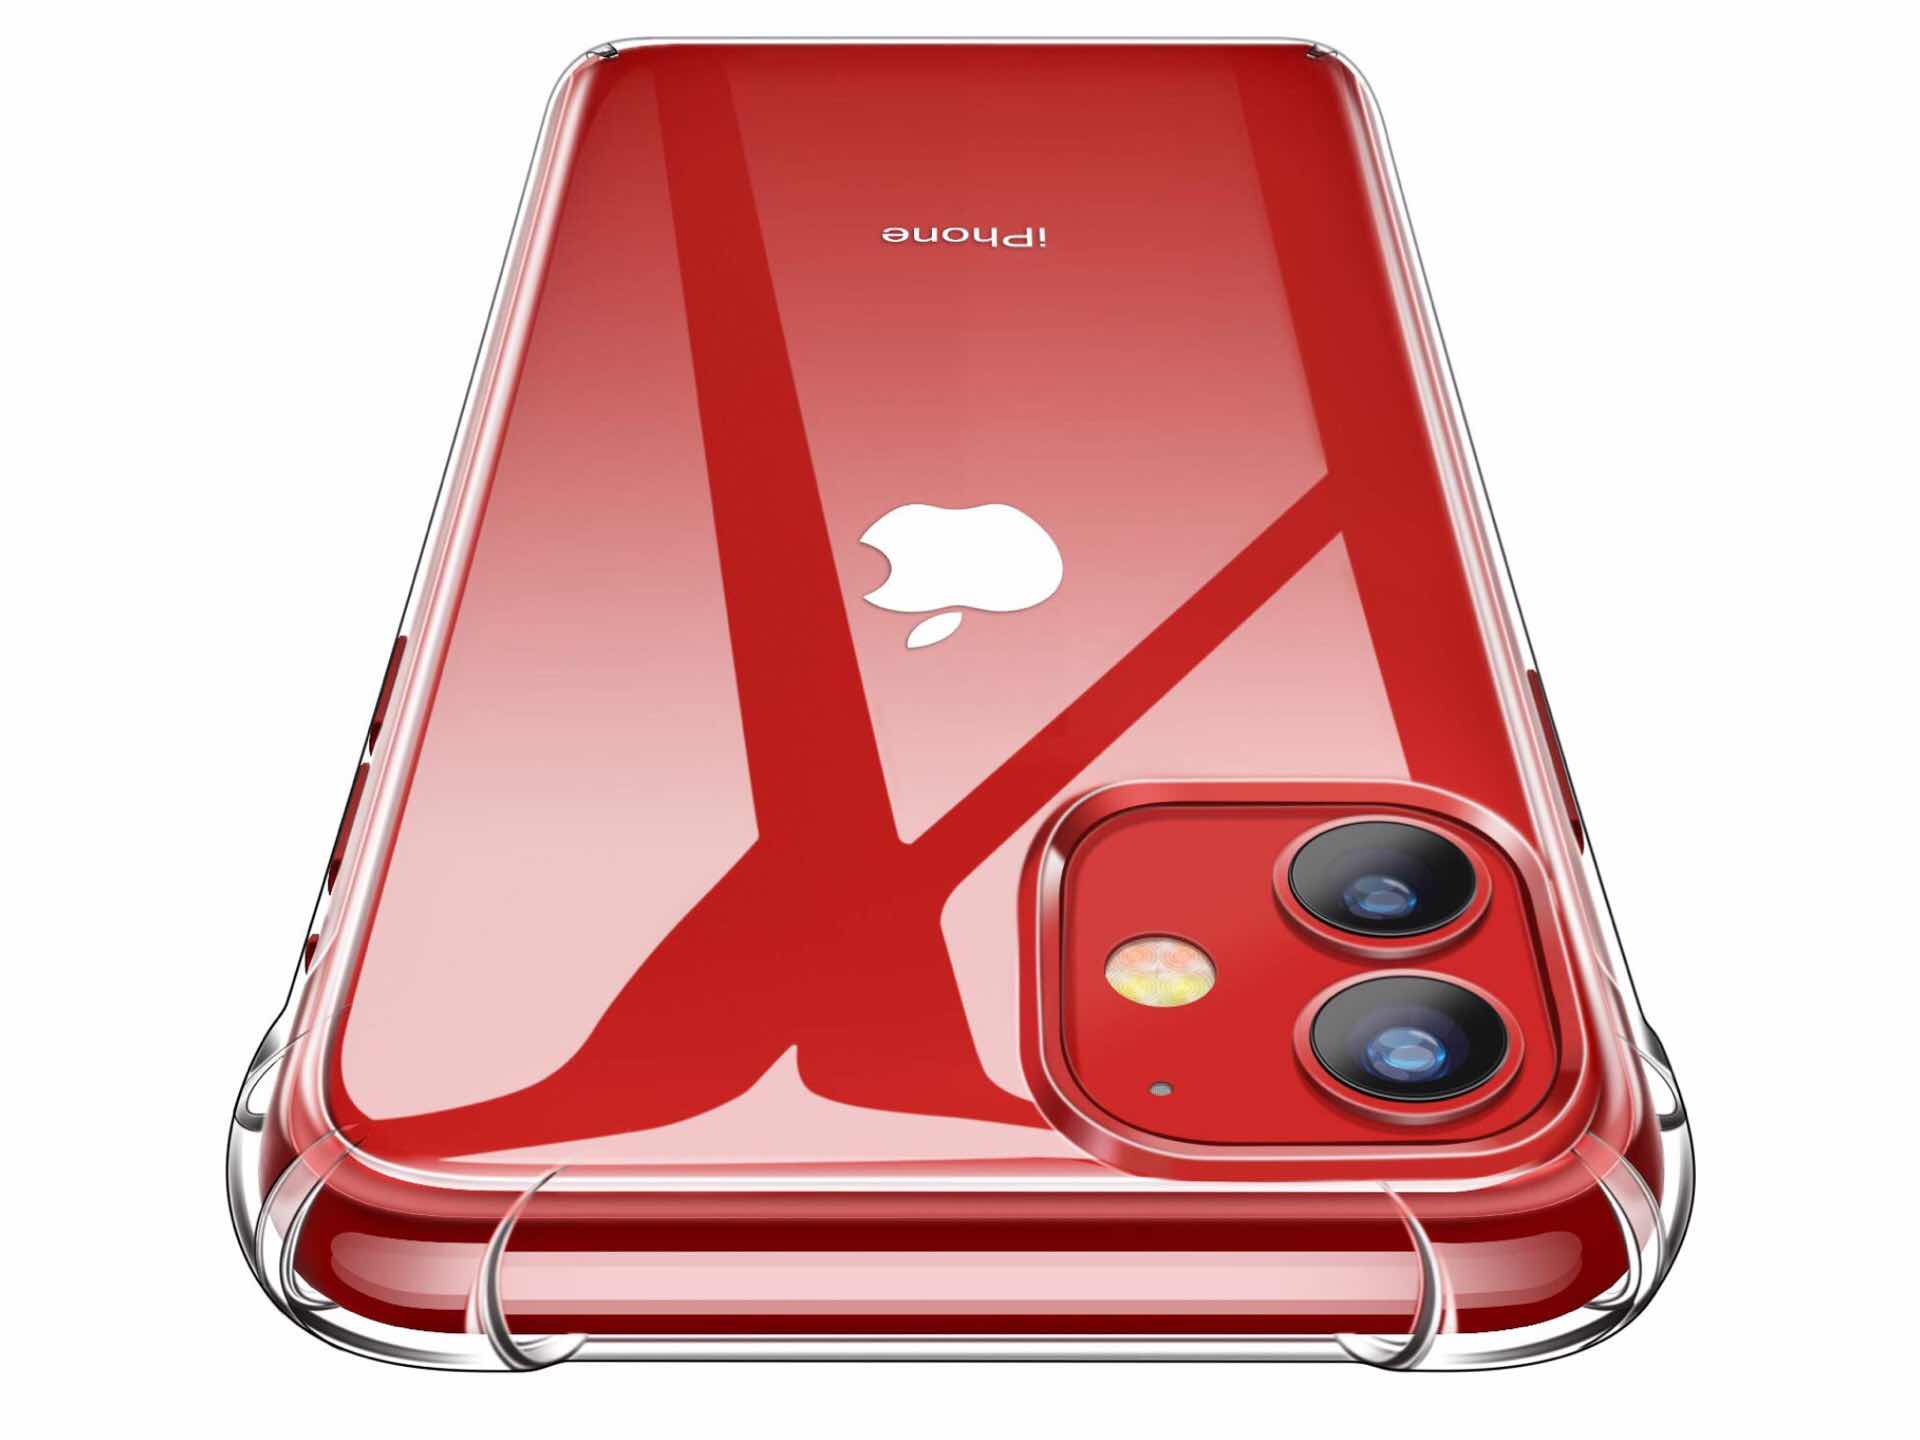 Canshn Crystal Clear Case For Iphone - Product Red Case Iphone 11 -  1920x1440 Wallpaper 